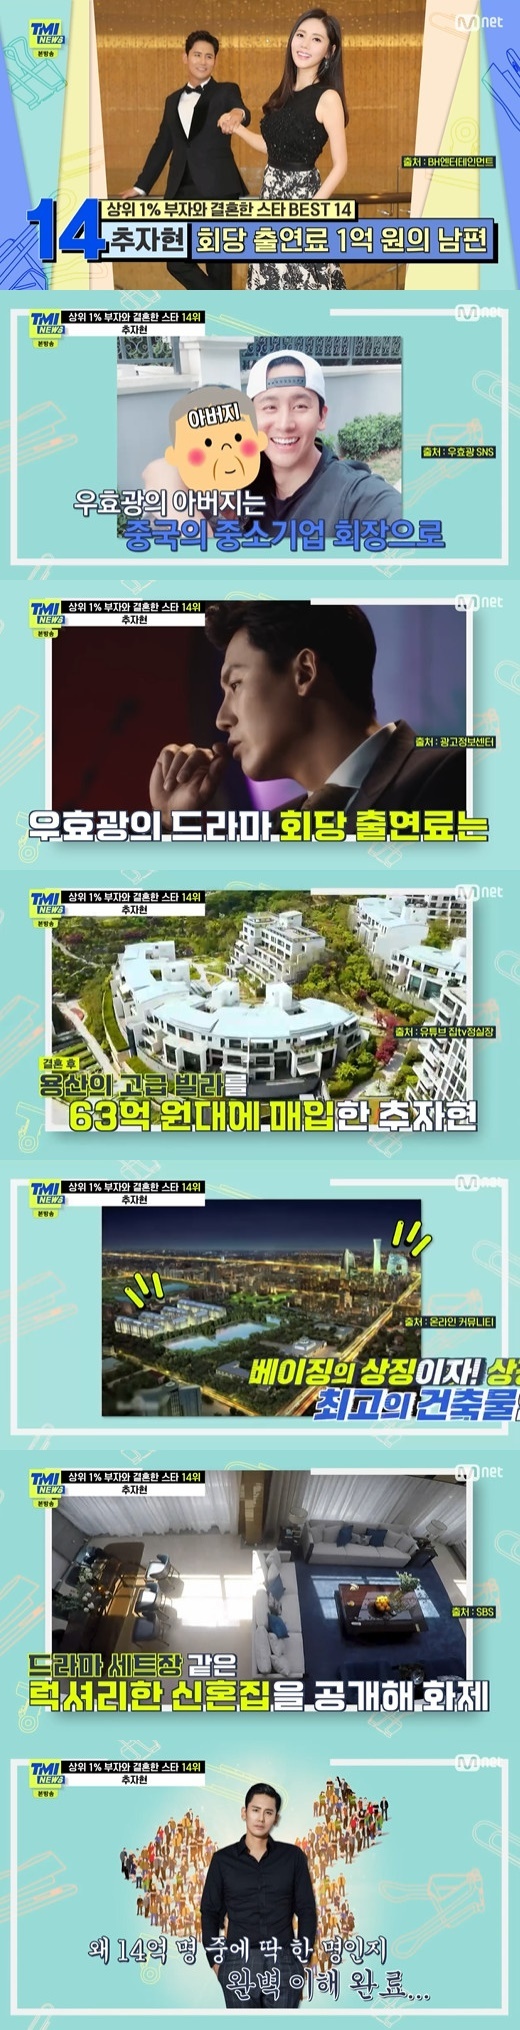 In TMI News, stars who married top 1% rich people such as actor Jun Ji-hyun, Lee Si-young and So Yoo-jin were introduced.On the cable channel Mnet TMI News broadcasted on the afternoon of the 23rd, the theme of Star Best 14 Married with the 1 percent Rich was covered.Singer Park Ji-yoon took the top spot in the long-awaited day.His husband is a K company co-founder Kim Do Hoon Cho Soo-yong, famous for his mobile messenger application, which ranked first in Koreas top invention in the 21st century.Cho Soo-yong Kim Do Hoon, a manager from Desiigner, has been in charge of designing portal sites Naver Search Window, Gwanghwamun D Tower, and Yeouido G Hotel.He was recruited as vice president of K-Company in 2016 and was appointed co-head Kim Do Hoon in 2018; last year, the amount of money included in bonuses was 3,475 million One.K companys A Year Ago in Winter sales are 4 trillion won and market capitalization is 54 trillion won.Second place is talent Lee Hye-young, who is a member of the founding member of the domestic private equity fund M. M is one of the largest private equity funds in Asia, with the funds under management of about 27 trillion One.Third was Jun Ji-hyun, the mother of two sons, nine years into their marriage.Jun Ji-hyun himself owns about 87 billion One worth of buildings for 100 million One per episode, but her husband Choi Jun-hyuk family is also a legend.Choi Jun-hyuk, a husband who boasts a similar appearance to actor Jang Dong-gun and So Ji-seop, was awarded a 70% stake in the company A Asset Management Vice President established by his father after graduating from prestigious K University and was appointed Kim Do Hoon.The companys operating assets are about 586.1 billion One.In addition, Jun Ji-hyuns grandmother is the late Lee Young-hee Hanbok Desiigner, and her mother-in-law Lee Jung-woo is also a Desiigner from prestigious universities.Jun Ji-hyuns husband, Choi Jun-ho, is from Group X-Raji and is currently managing director of ASEANs largest stock exchange.In particular, Choi Jun-ho married the only daughter of H group in Singapore.Park Chan-ho, who married Park Ri-hye, the daughter of a real estate representative family with a market capitalization of about 400 billion won, and Sooo-jin, who married Baek Jong One, the representative of the company with annual sales of about 120 billion won, and Cho Soo-ae, who married Park Seo-ae, Park Shin-yang, who married her daughter Baek Hye-jin, and Hong Jin-kyung, who married Kim Jung-woo, the son of the family of about 18.9 billion won, and Su-hyun, who married Cha Min-keun, the representative of the 9.1 billion won investment attraction company, and Clara, who married Samuel Hwang, a businessman with about 8.1 billion won Han Chae-young, who married Choi Dong-joon, and Kim Jae-yeon, who married Park Seo-yeon, an agency representative of about 2.4 billion won in annual sales, were named.12th place is Lee Si-young; his husband, who wed in 2017, is Cho Seong-hyun, a restaurant businessman called Little Baekjong One.Cho Seong-hyun succeeded in the roof top bar, Hanwoo meat specialty store, Lee Si-young regular pork restaurant located in Cheongdam-dong, Gangnam-gu, Seoul.The annual sales of the restaurant business he represents are 2.5 billion One.In particular, Lee Si-young and Cho Seong-hyun earned about 4 billion 75 million won in two buildings in four years.The 14th place is Choo Ja-hyun, who has been with Woo Hyo-kwang for about a hundred years. The two men have been in a relationship with each other in the Chinese drama in 2012.He was later reunited in 2015 in his work, and officially announced he was a lover; he first reported his marriage in 2017 and then married in 2019.Woo Hyo-kwangs father is a huge financial figure as chairman of China Small and Medium Business. Woo Hyo-kwang himself is also more than 100 million won per drama.In particular, Woo Hyo-kwang Choo Ja-hyun bought the Seoul Yongsan luxury villa for 6.3 billion One, and set up a honeymoon home where the CCTV building, the symbol of China Beijing, is visible.The price of this house is about 9 billion One based on A Year Ago in Winter.